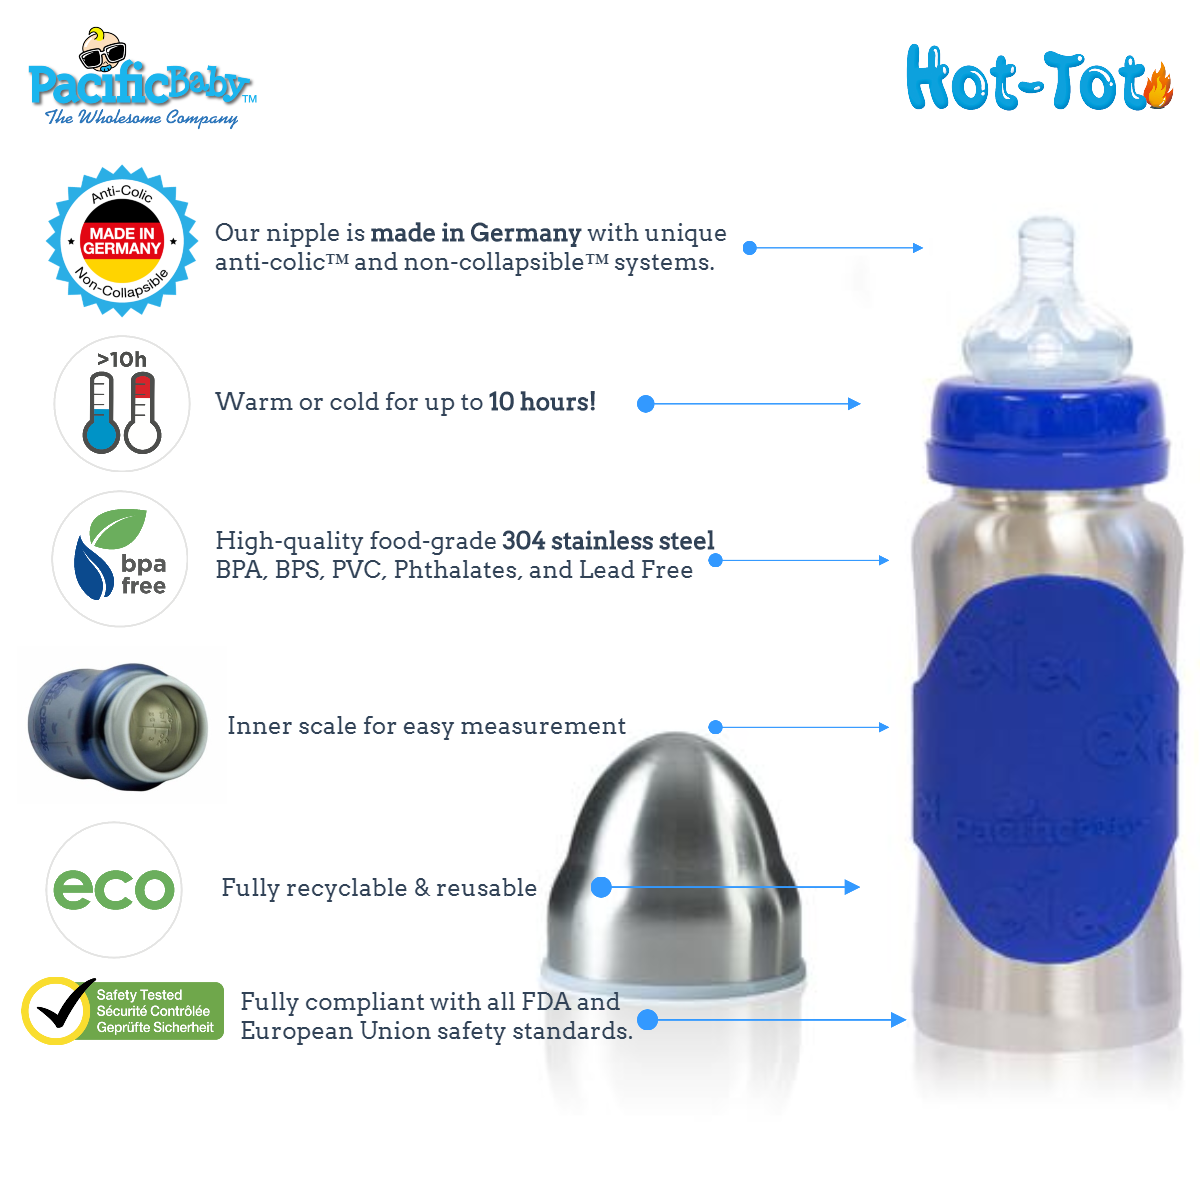 Pacific Baby Hot-Tot Stainless Steel Insulated Infant Baby 7 oz Eco Feeding Bottle Blueberries